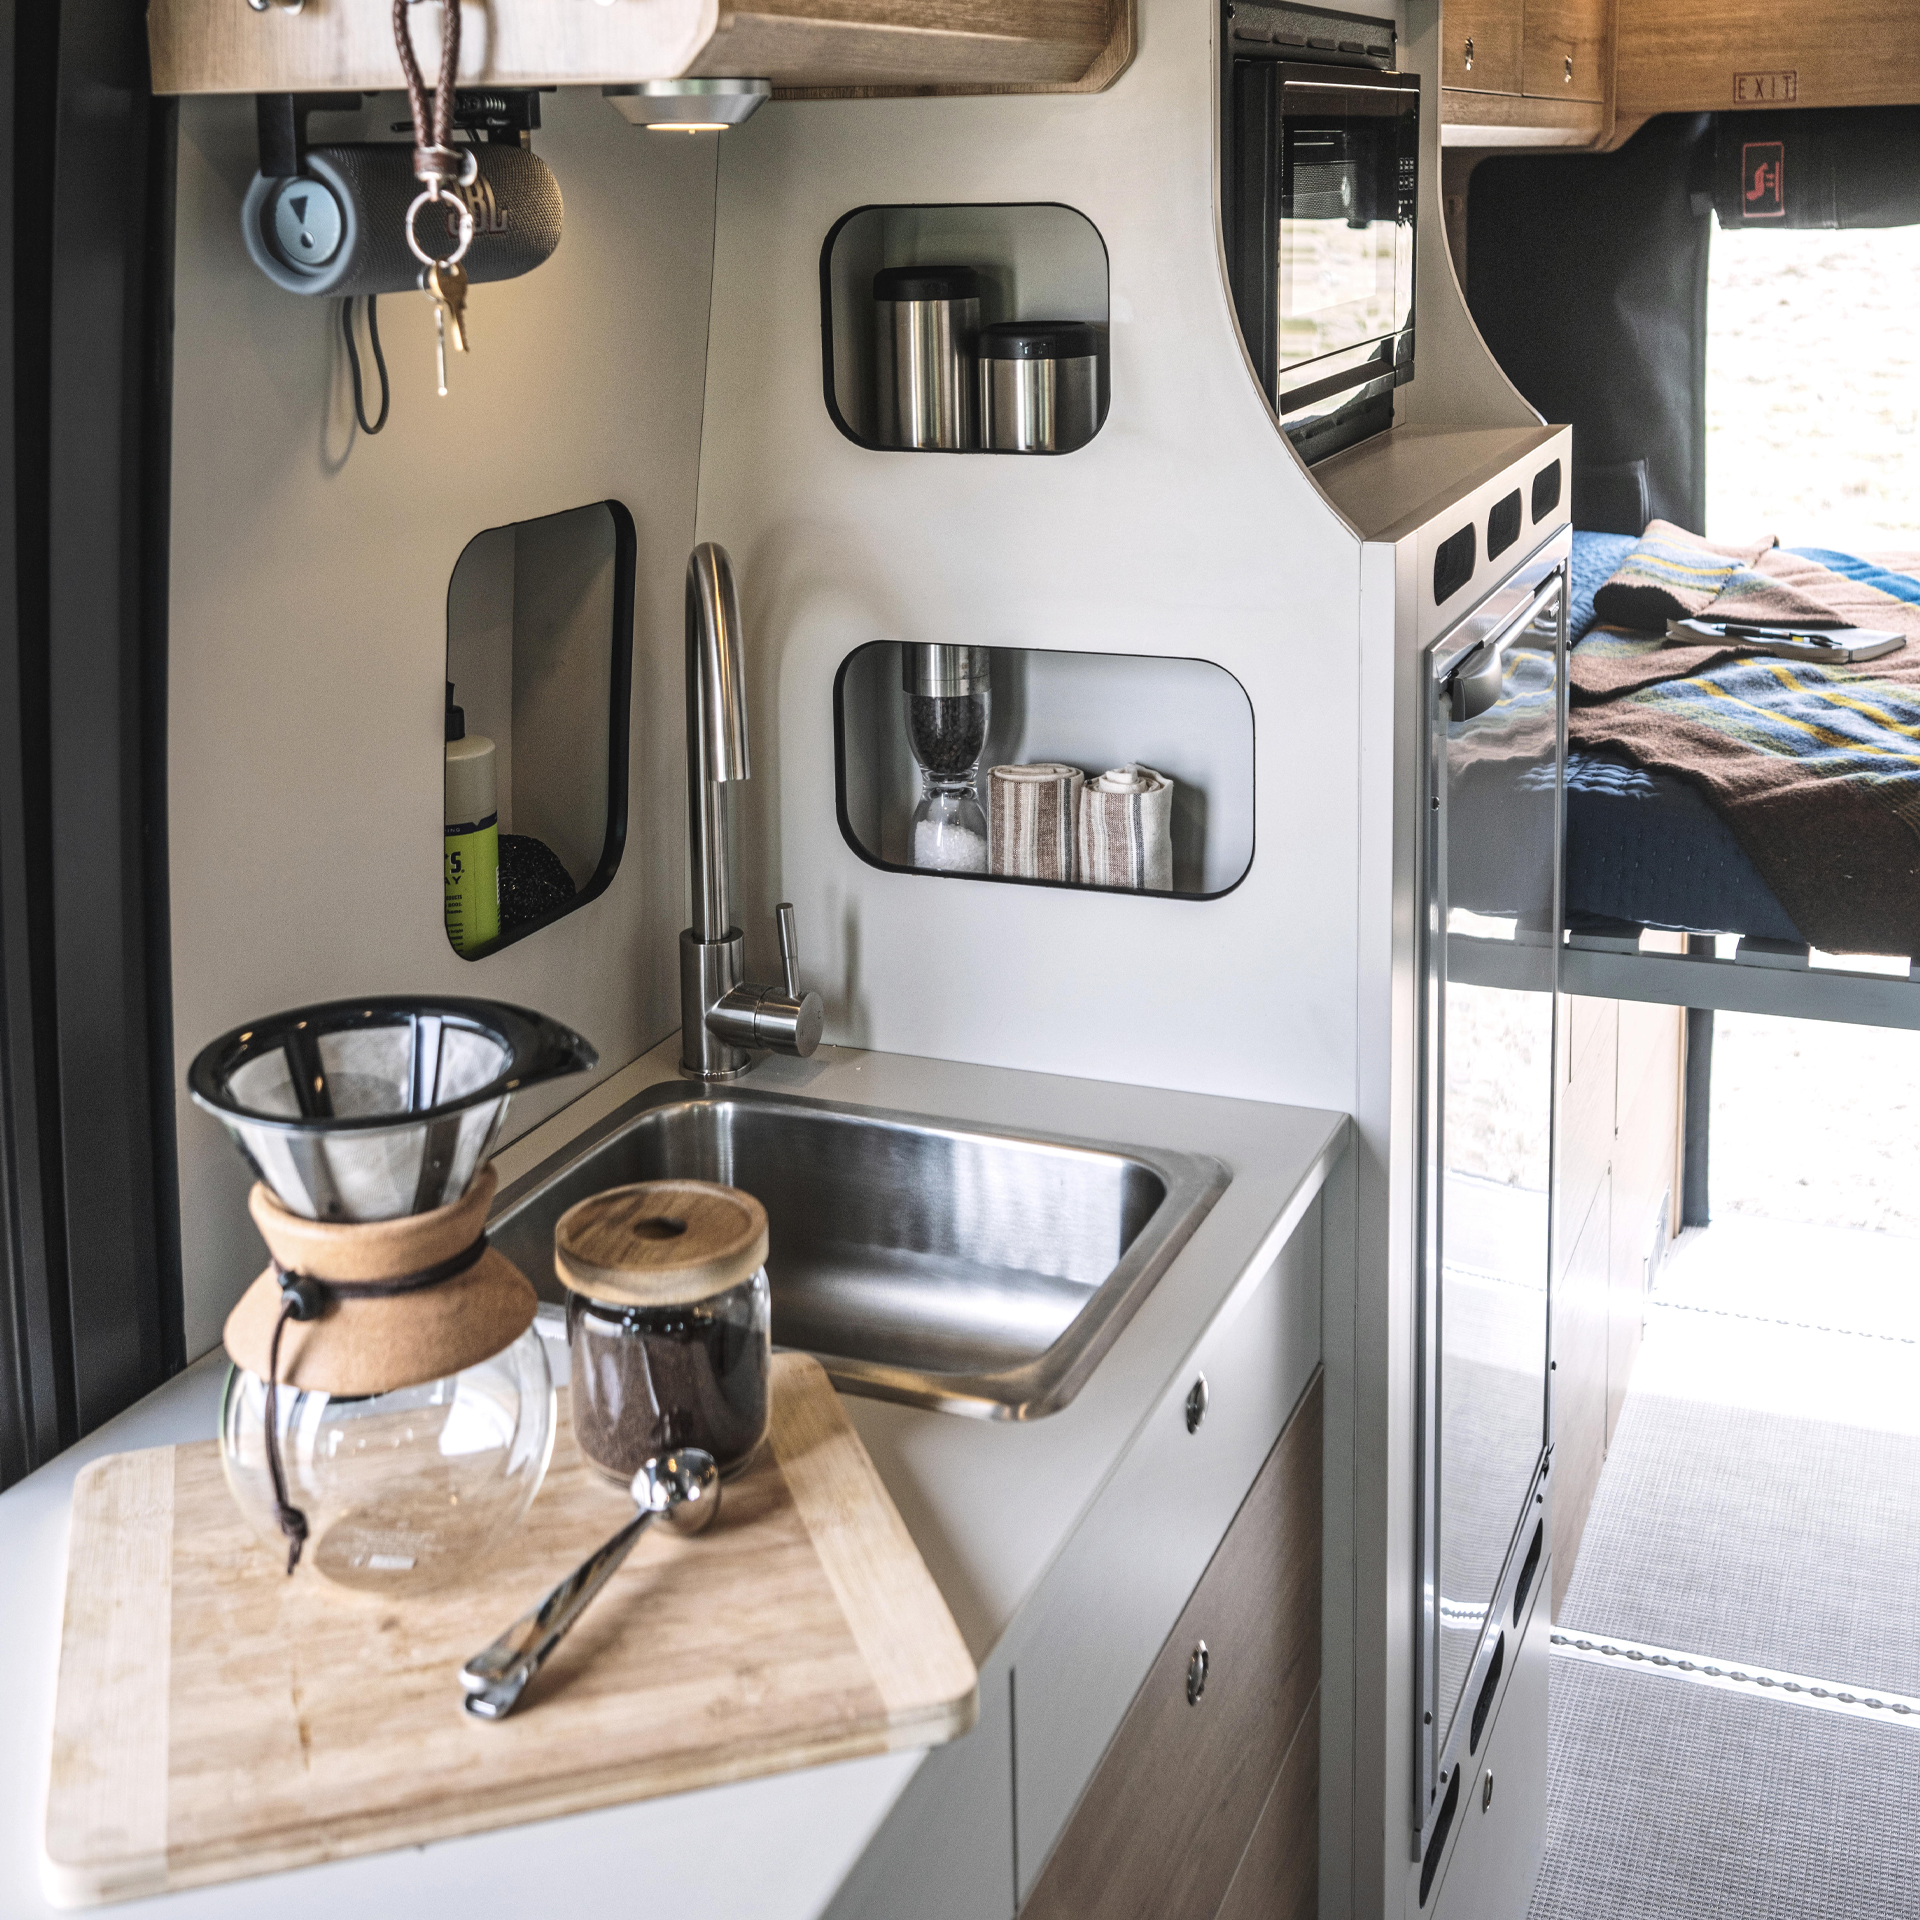 The interior from front to back in the Airstream Rangeline Touring Coach